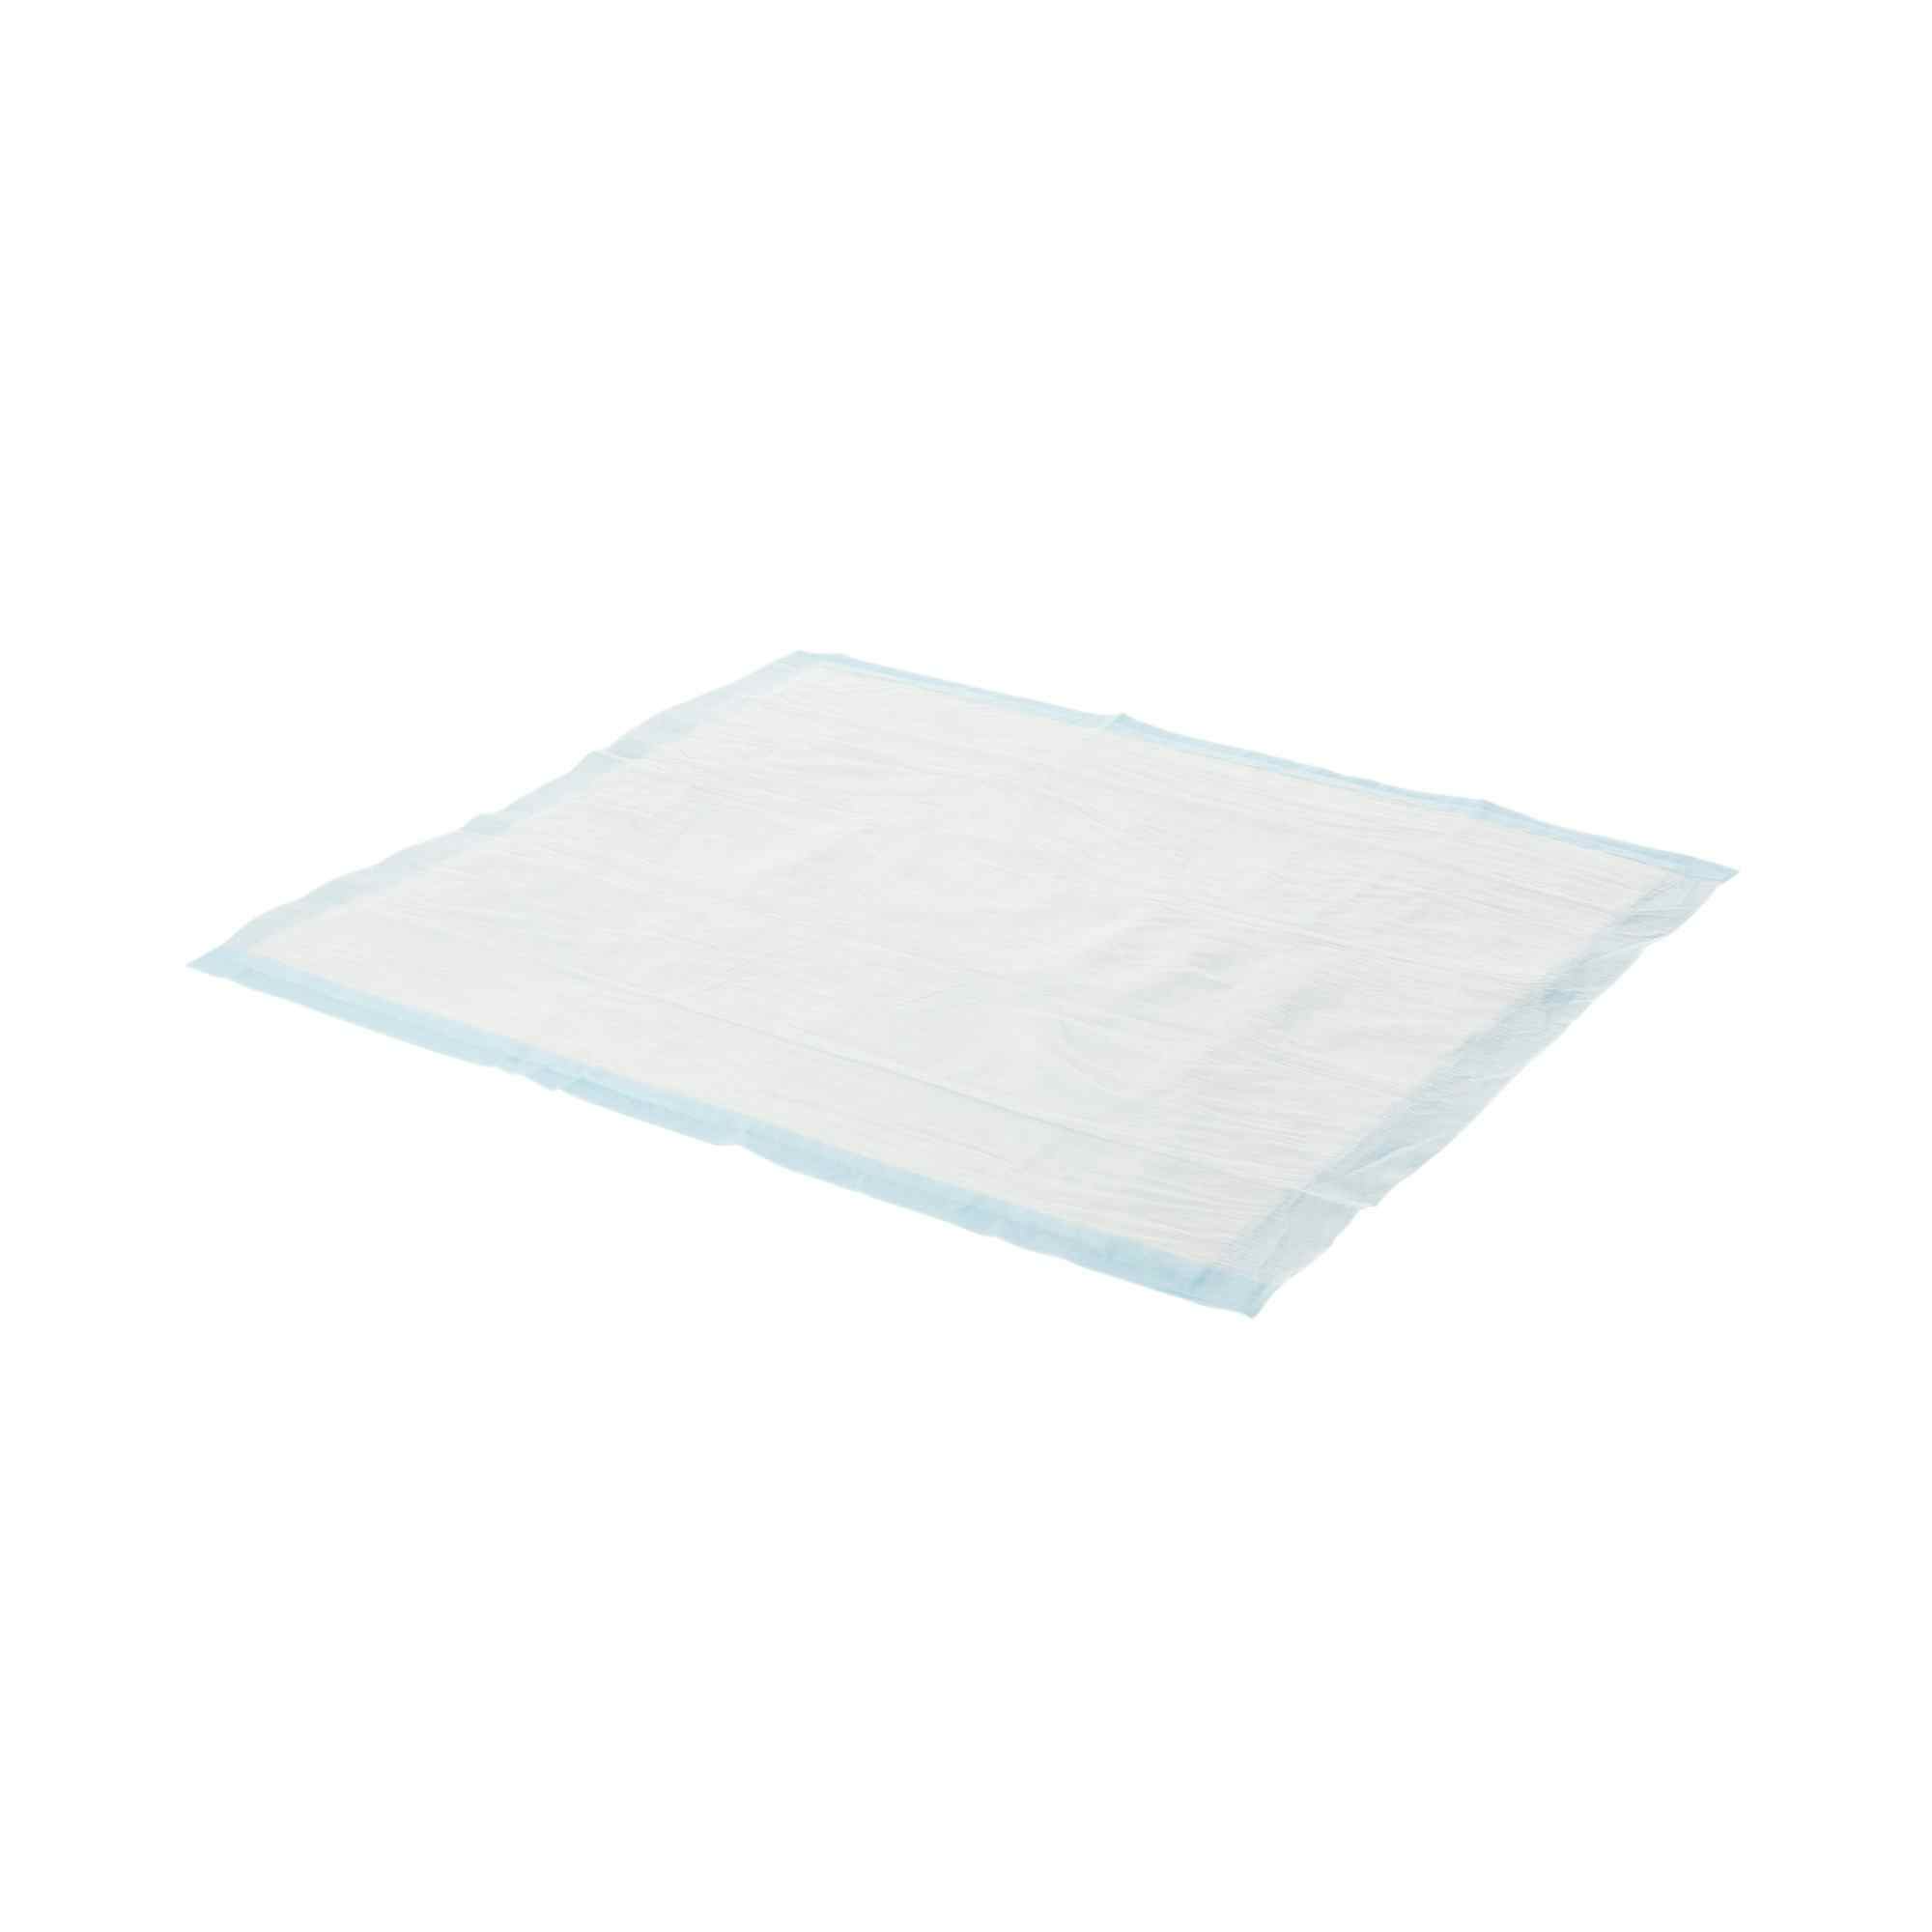 Prevail Air Permeable Low Air Loss Underpad, Heavy